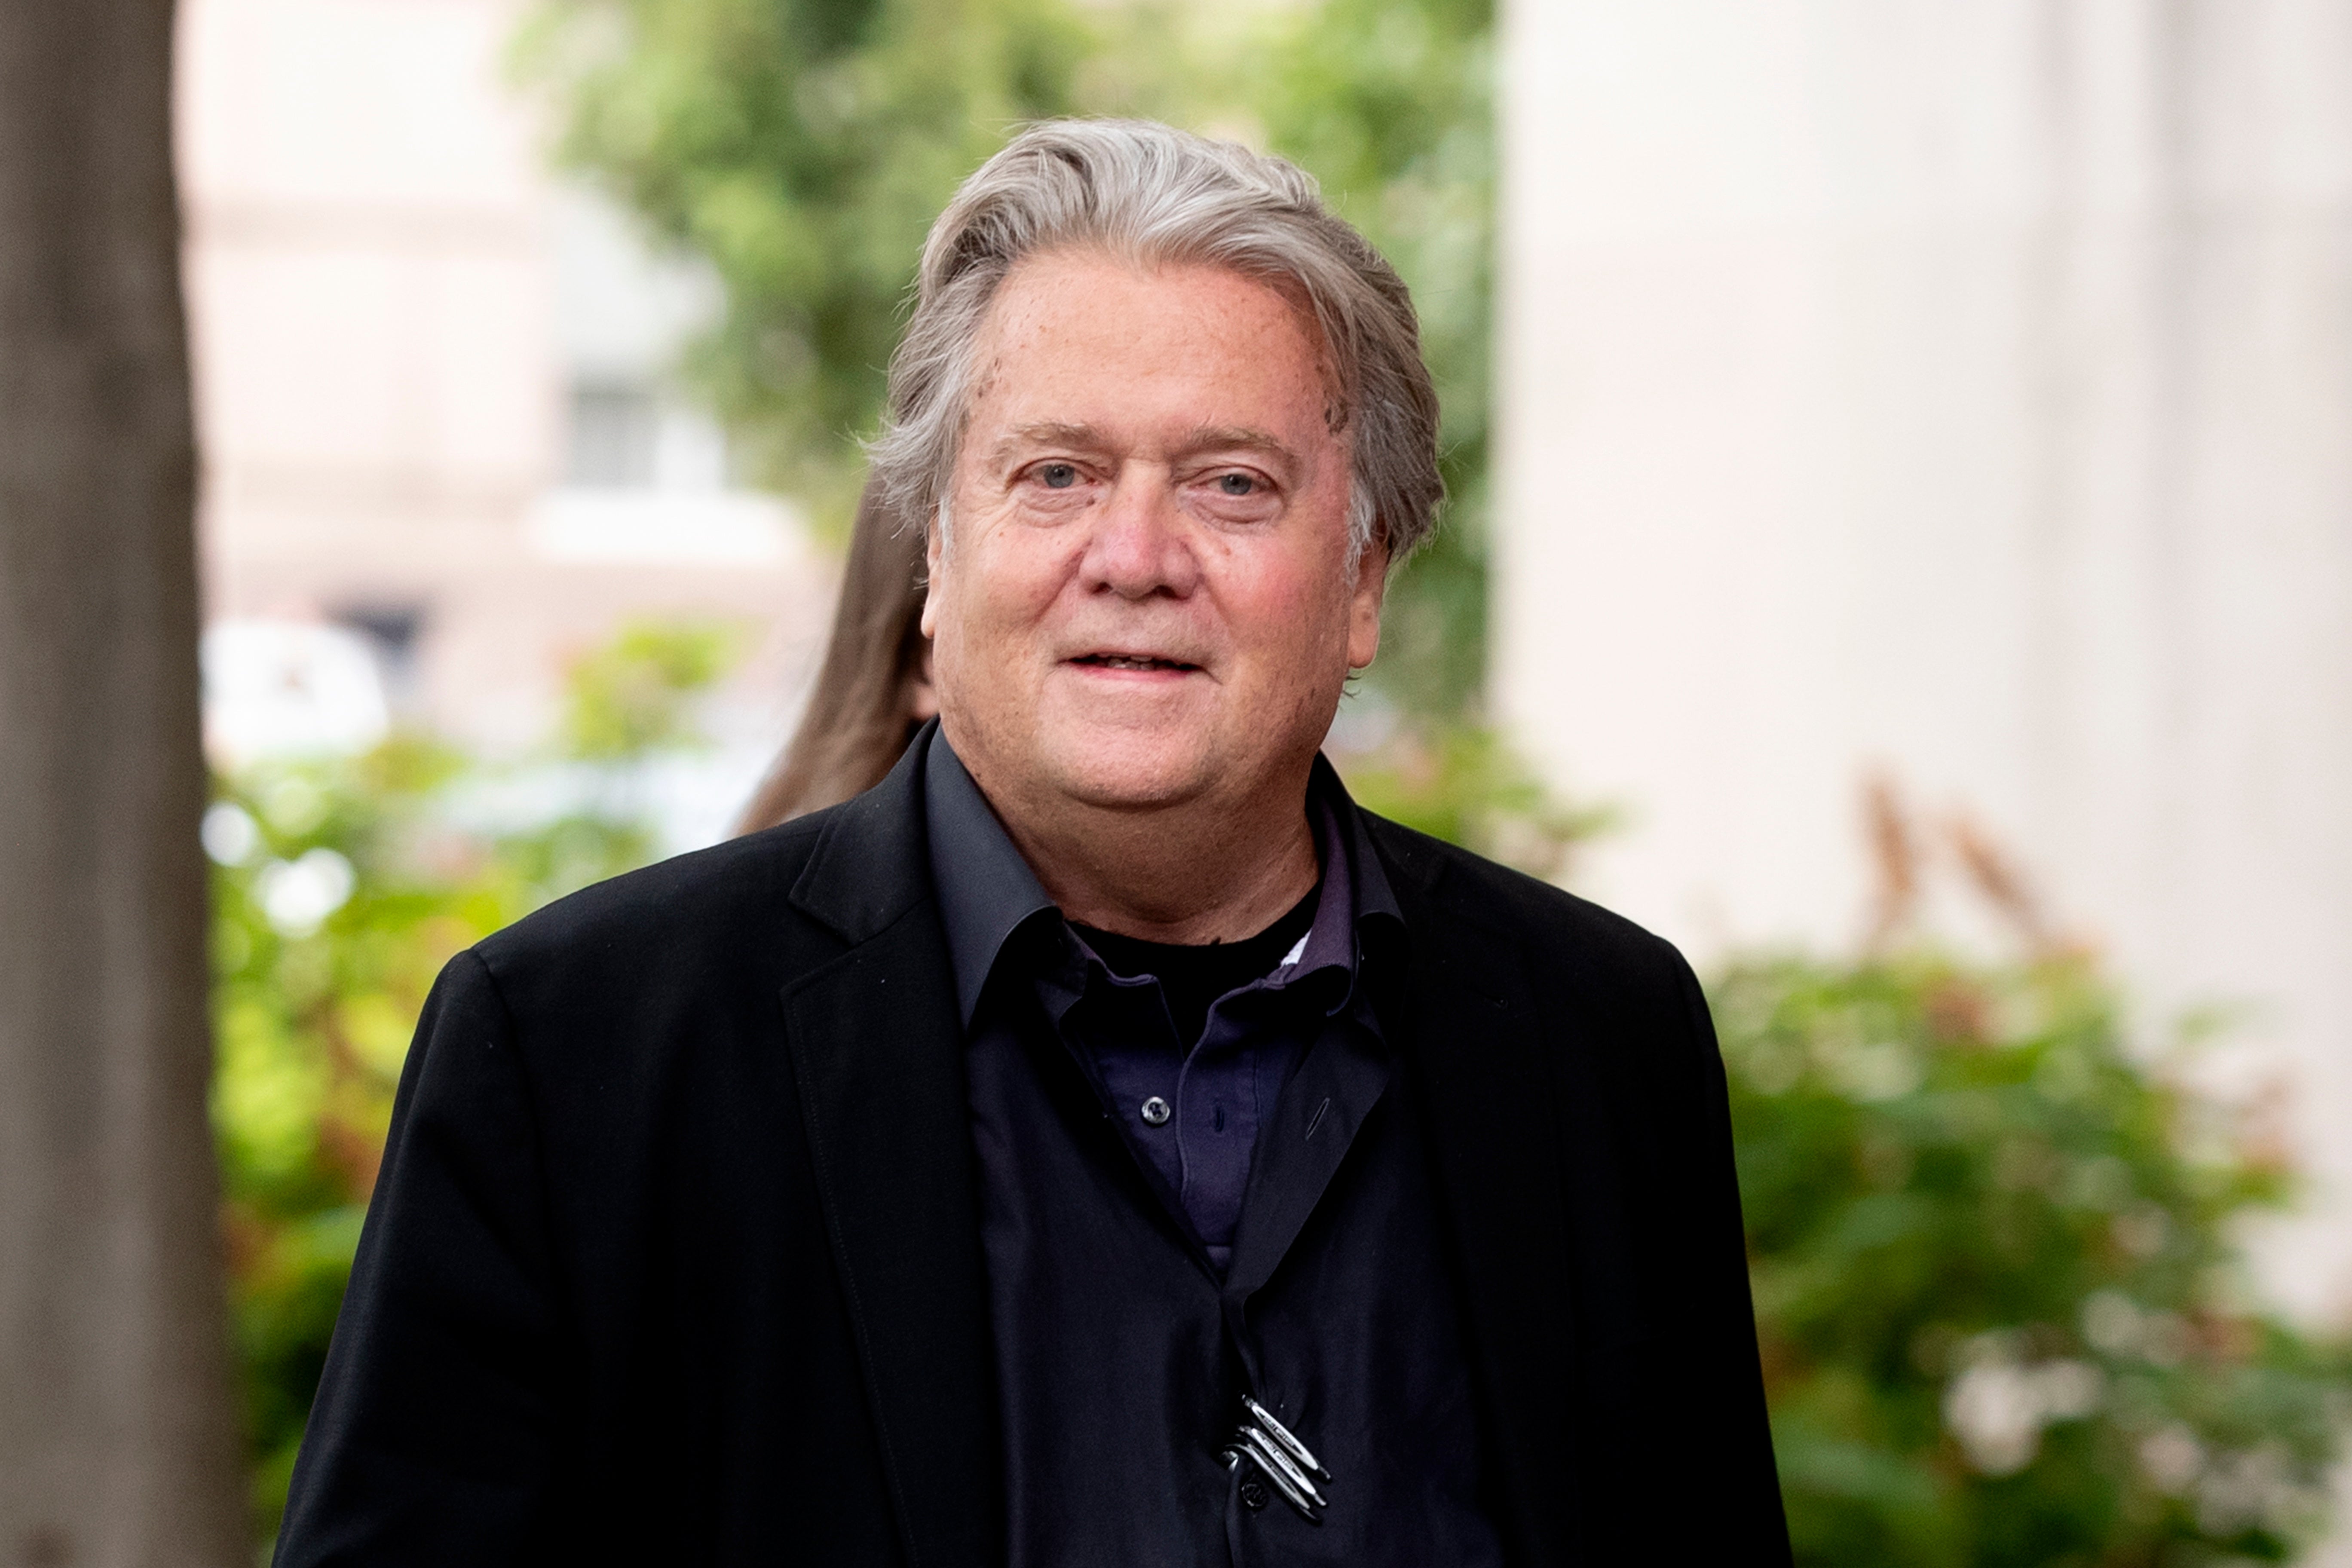 Former White House chief strategist Steven Bannon arrives at the E. Barrett Prettyman Federal Courthouse in Washington, DC, on 18 July 2022